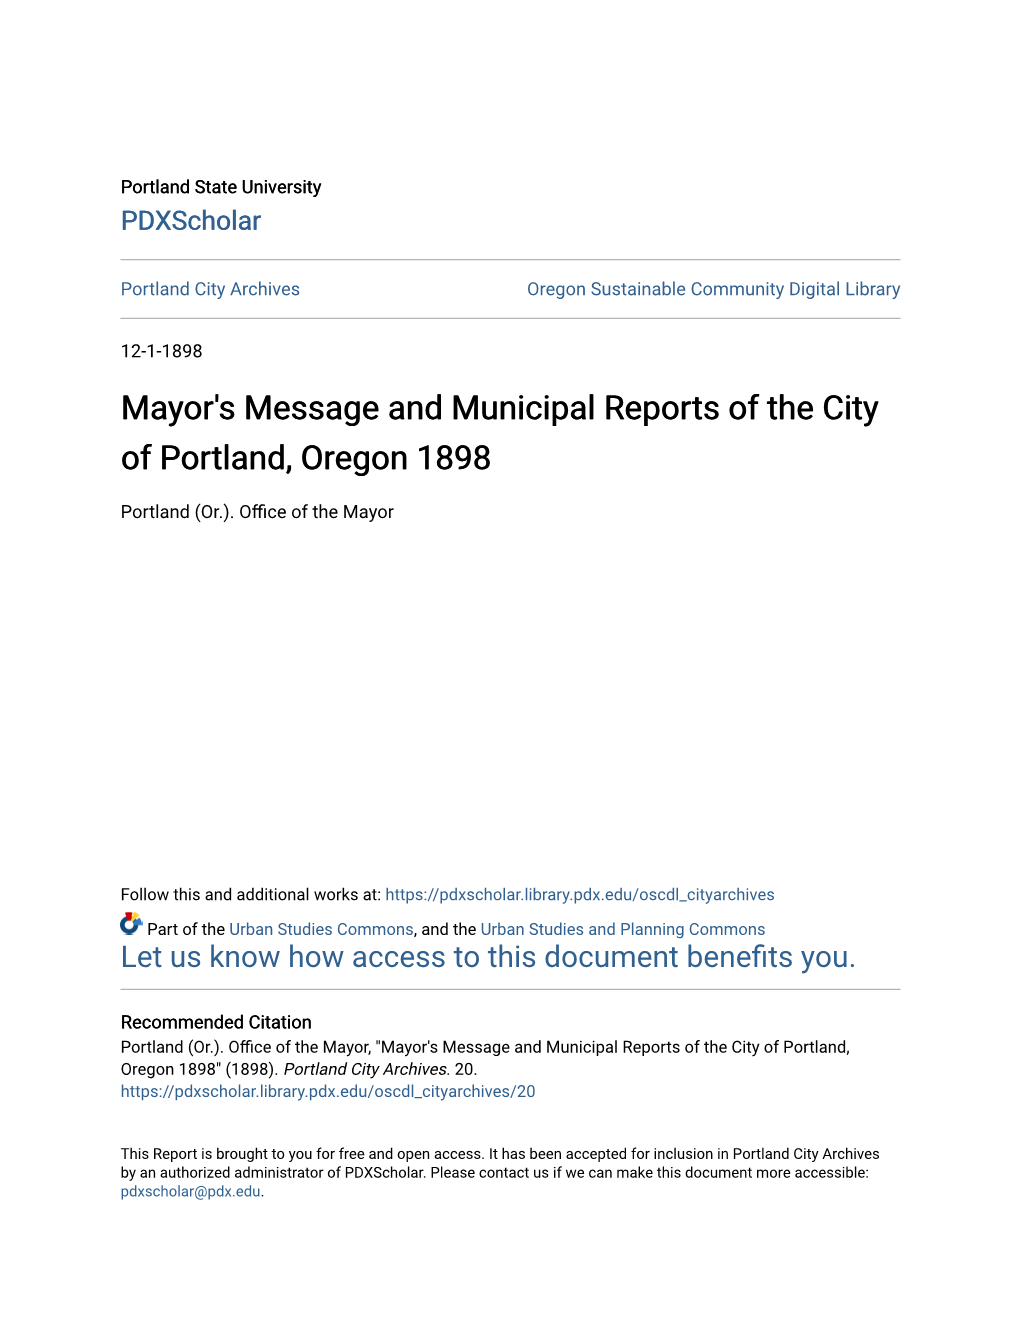 Mayor's Message and Municipal Reports of the City of Portland, Oregon 1898